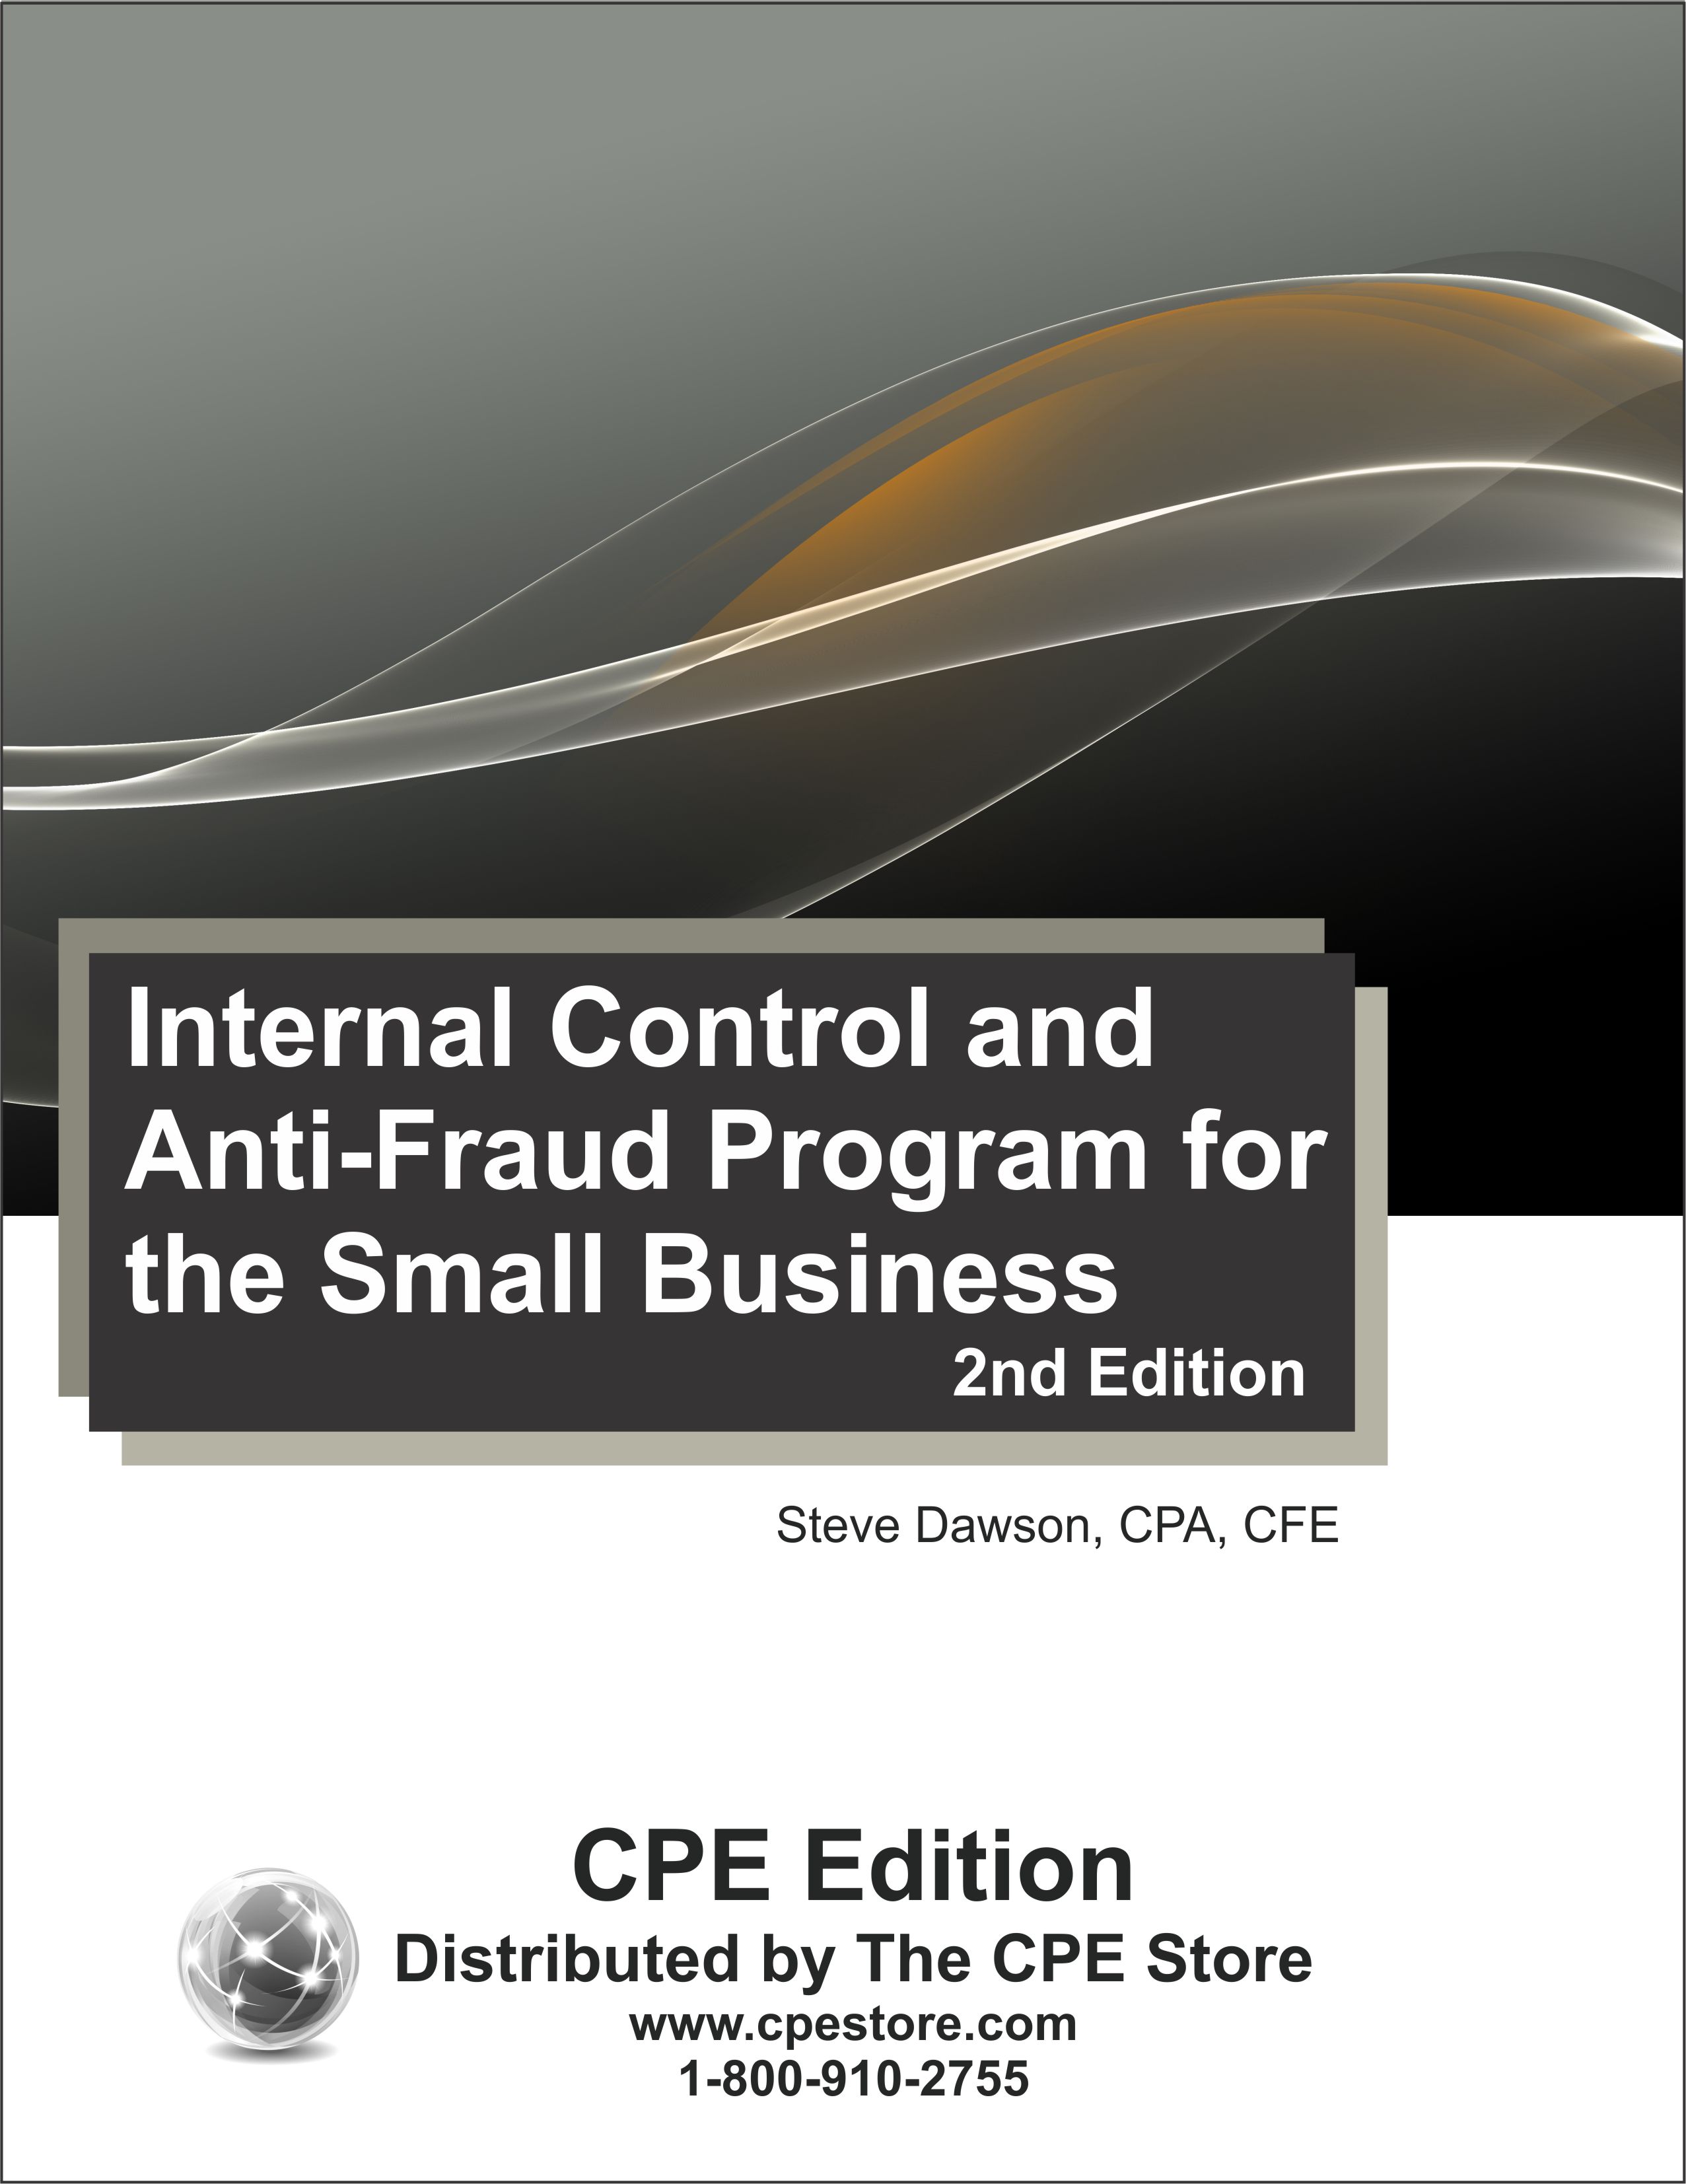 Internal Control and Anti-Fraud Program for the Small Business